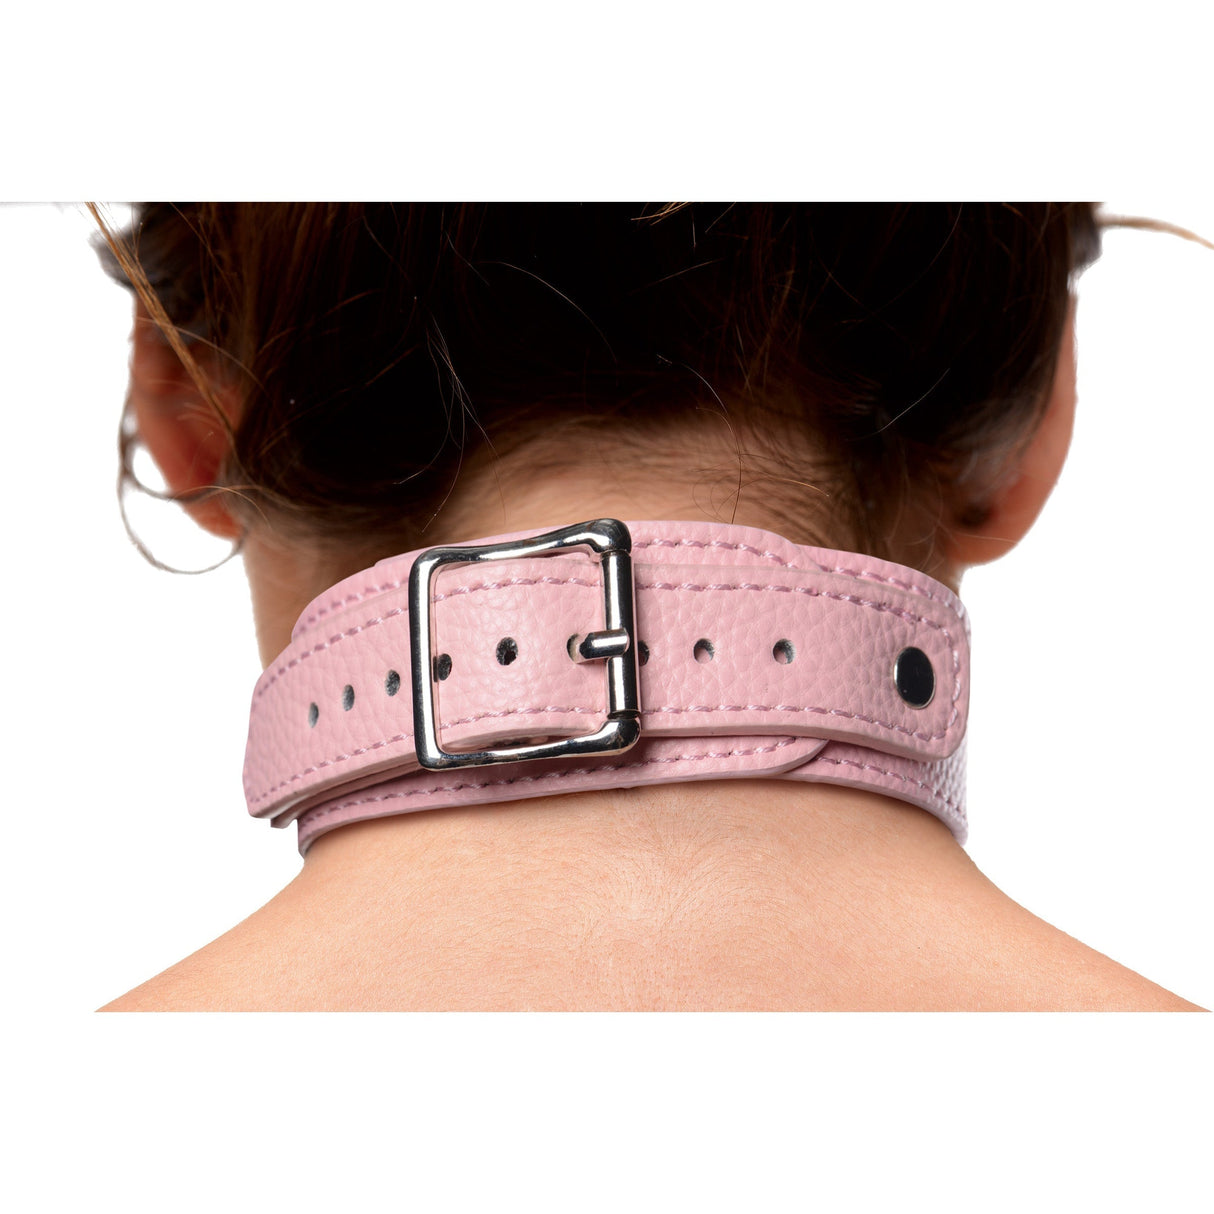 Miss Behaved Pink Chest Harness